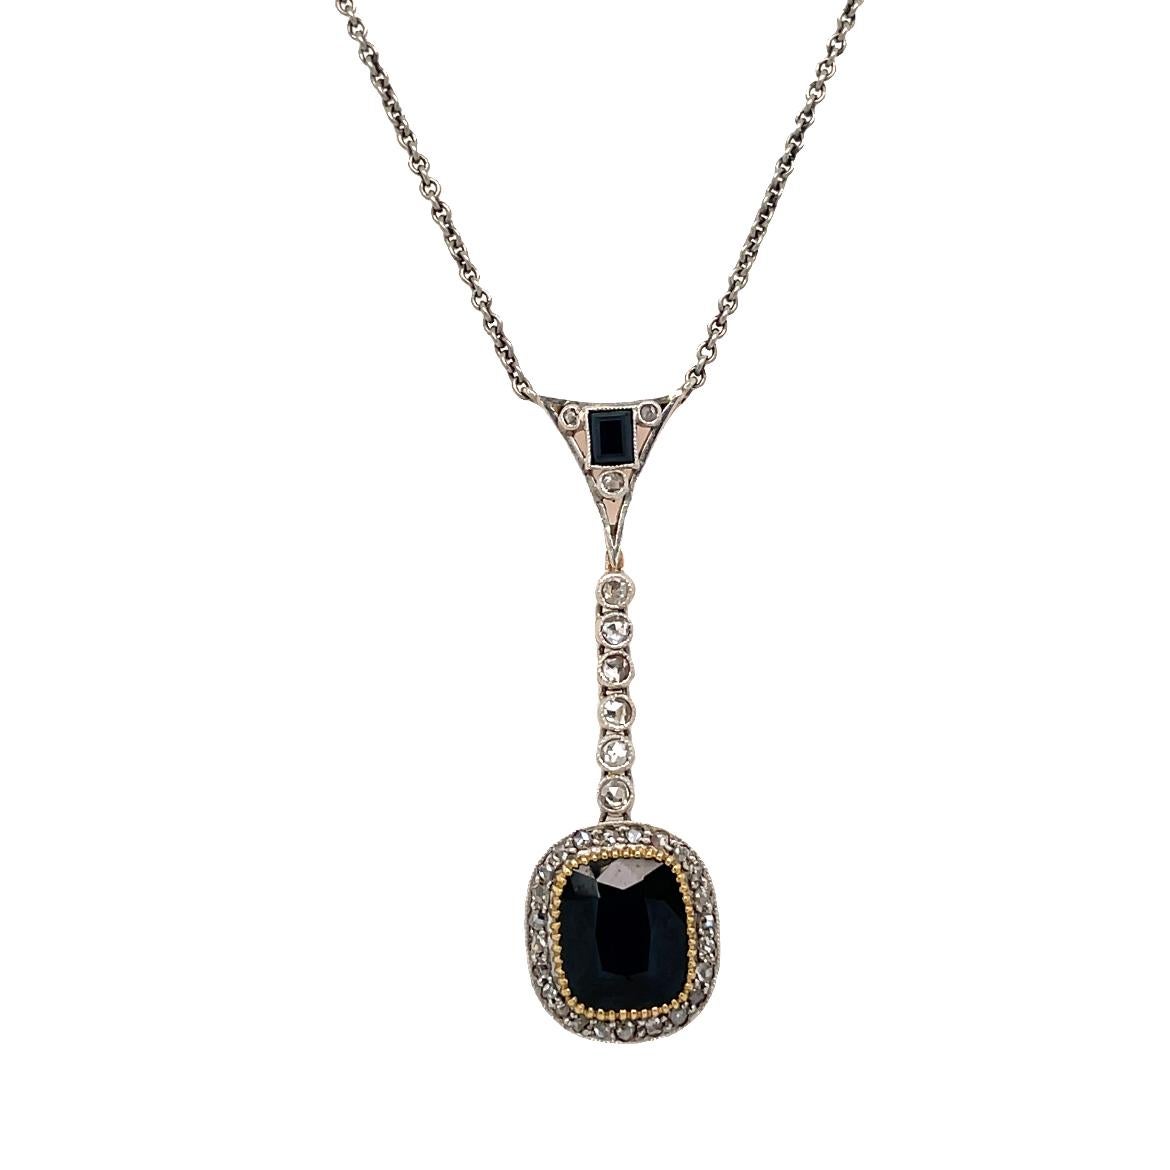 Genuine antique 1900's Edwardian gold necklace featuring one large cushion Natural Sapphire, 3 carats and adorned by sparkling single-cut diamonds, total weight 0,50 carats.

This jewel is authentic in every part, the engraving and filigree make it